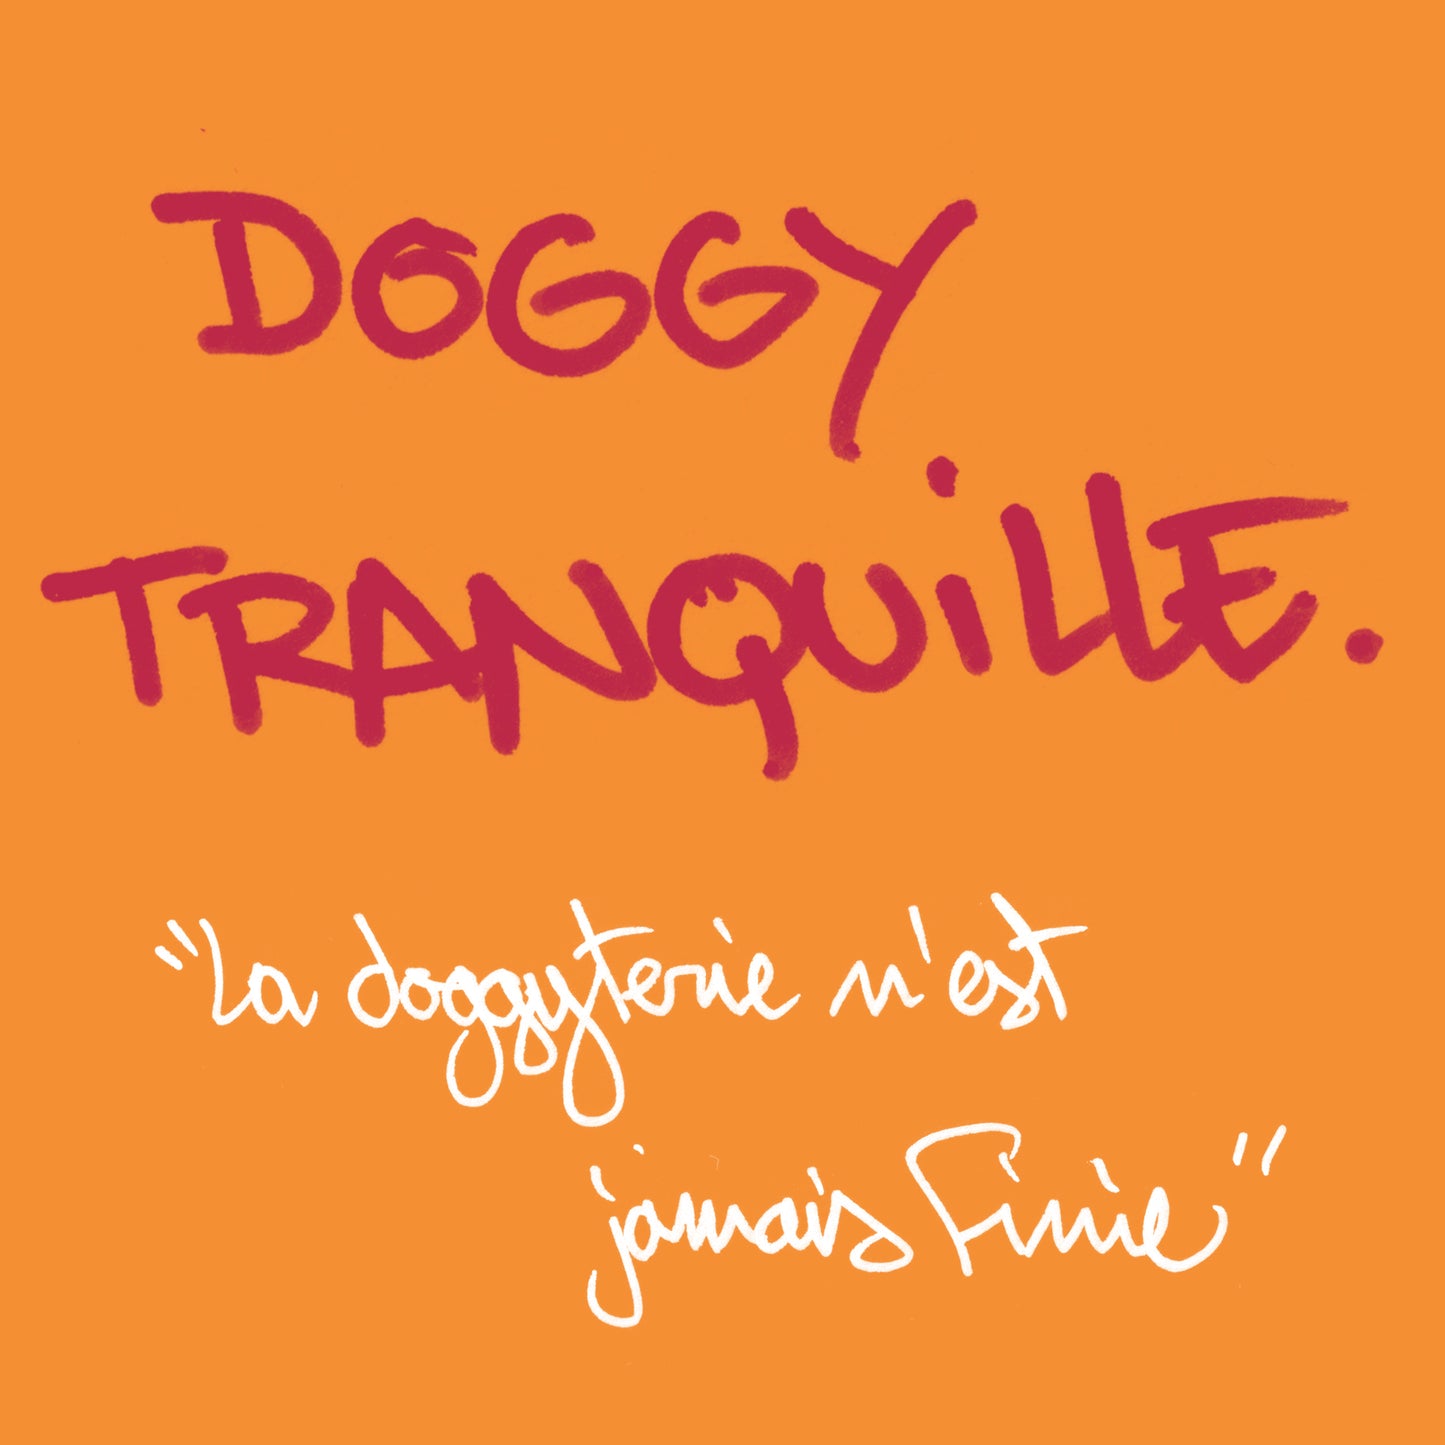 Doggy Tranquille